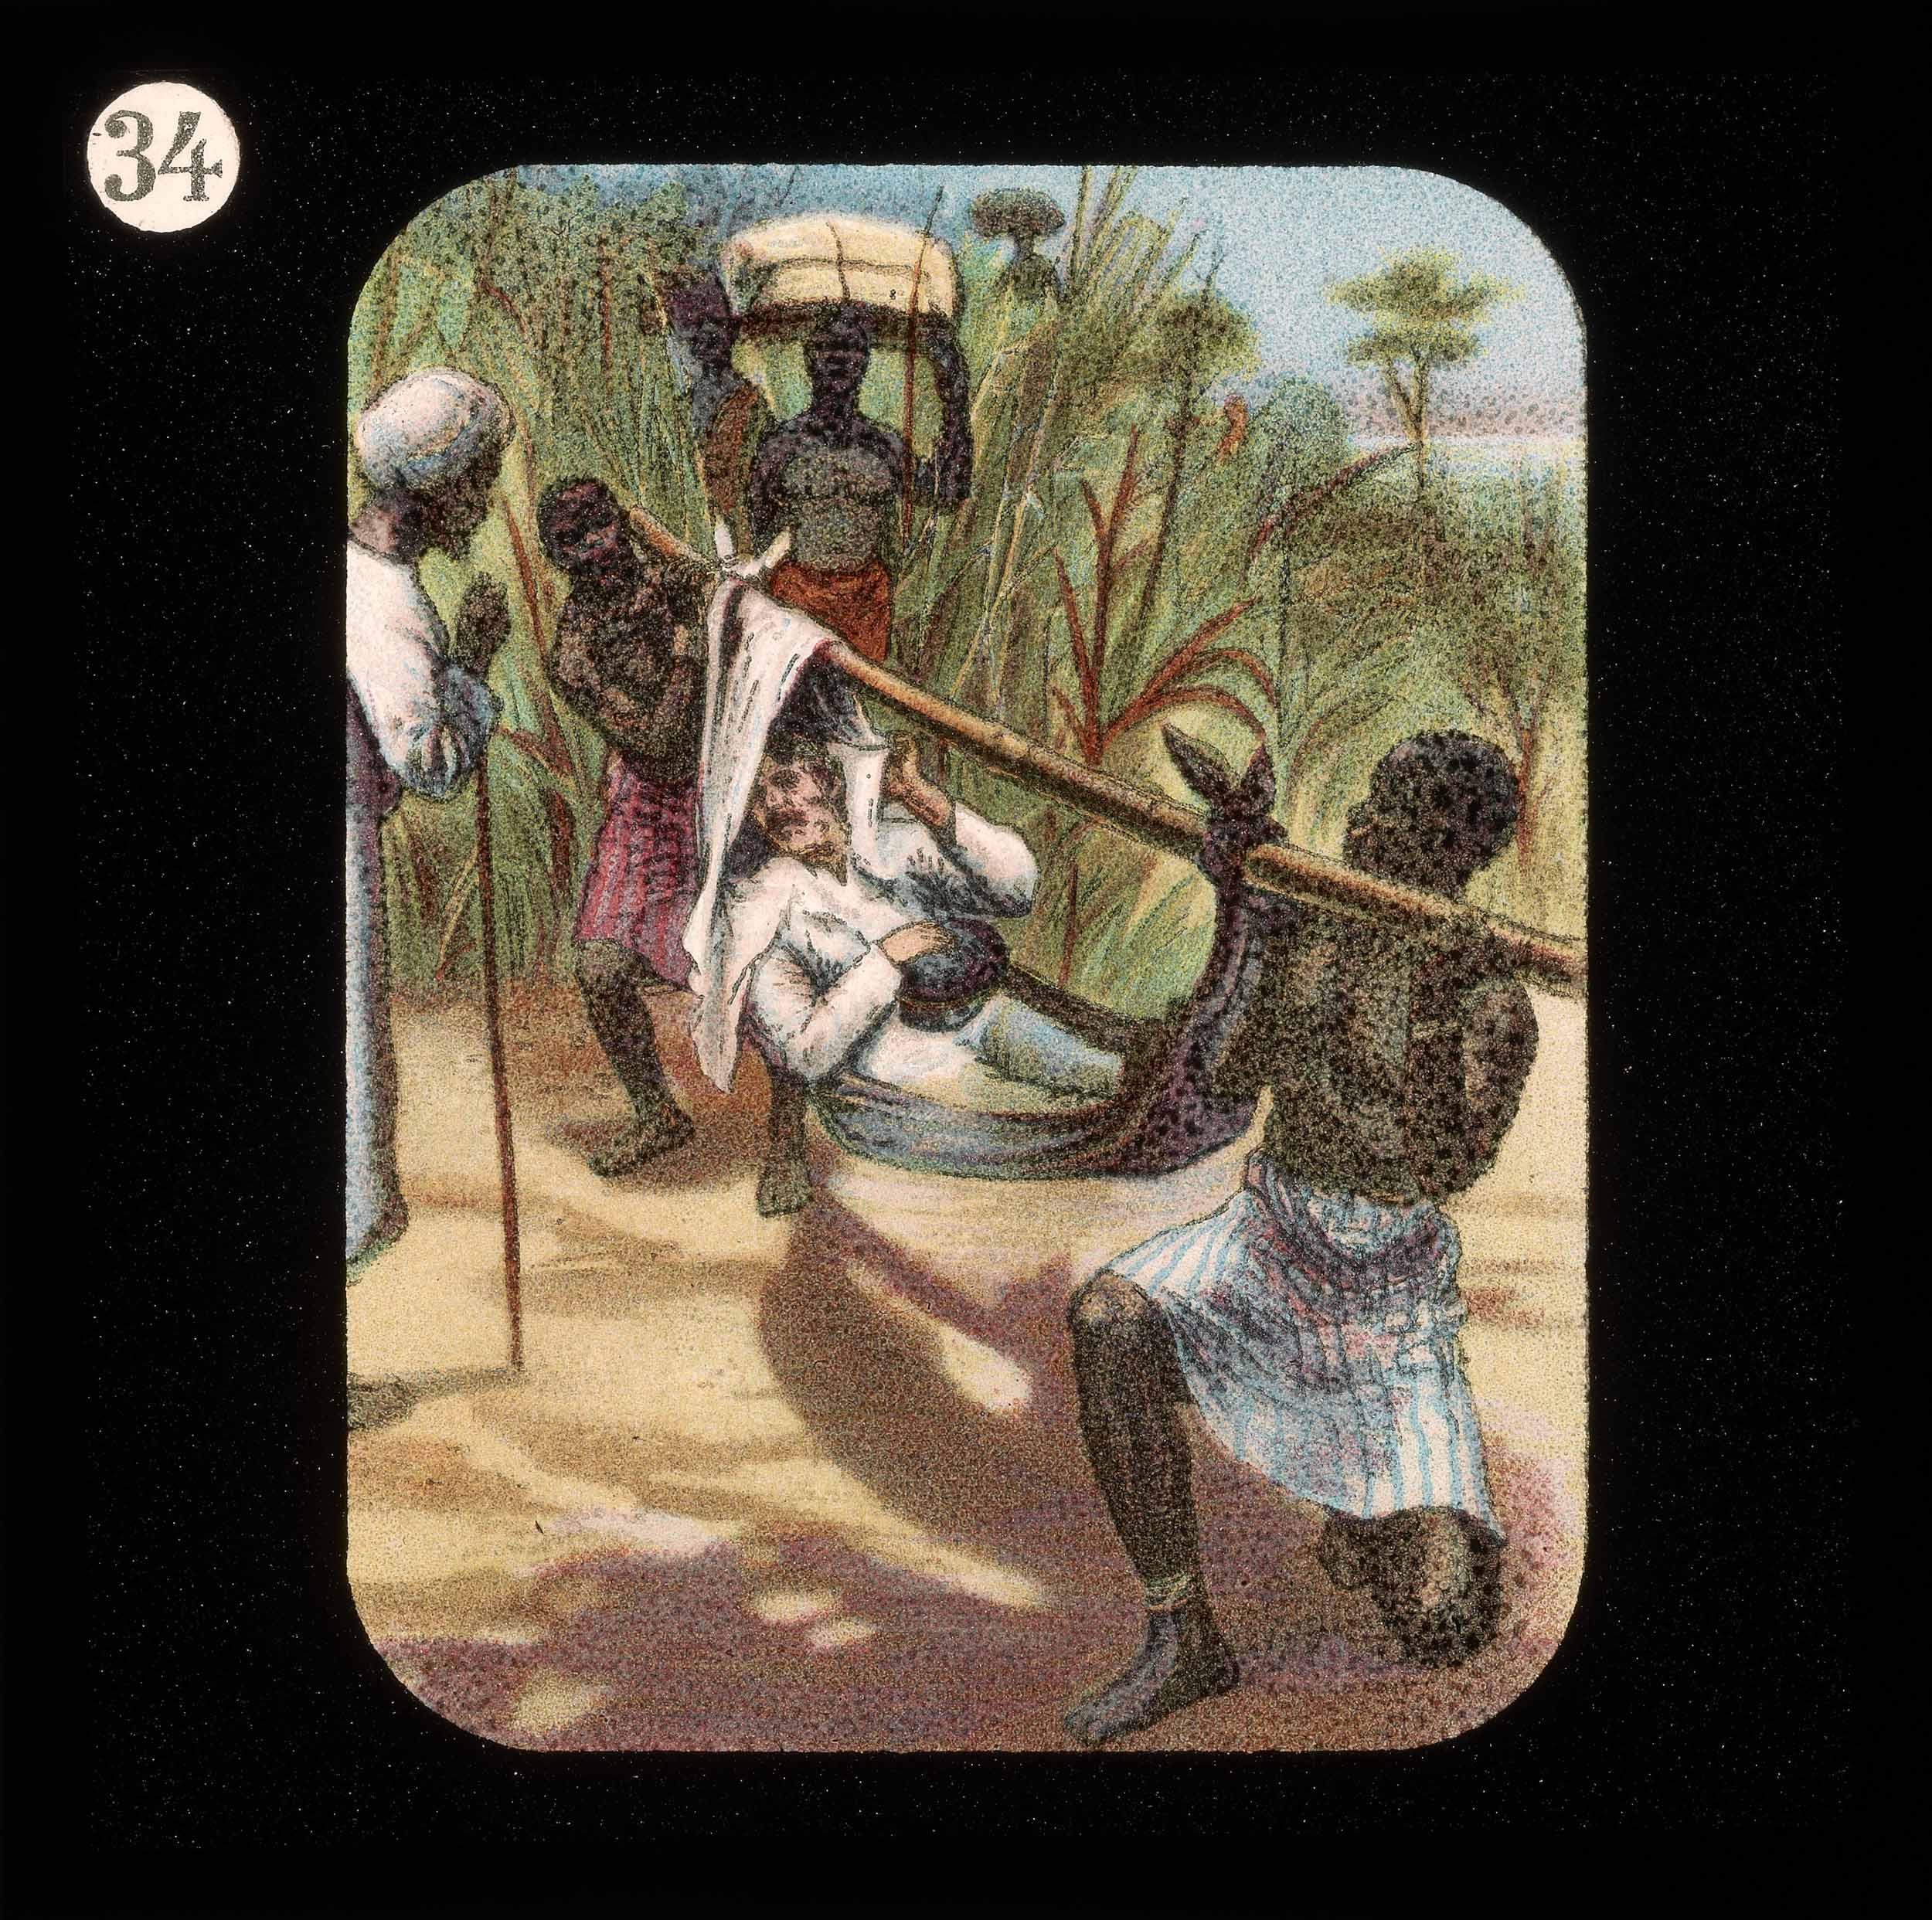 Unknown Creator, Lantern Slide of the Life, Adventures, and Work of David Livingstone, Date Unknown (c.1900). Courtesy of the Smithsonian Libraries, Washington, D.C. During his last journey (1866-73), Livingstone continuously relied on his African and Arab companions to support all aspects of his travels, as this slide illustrates.